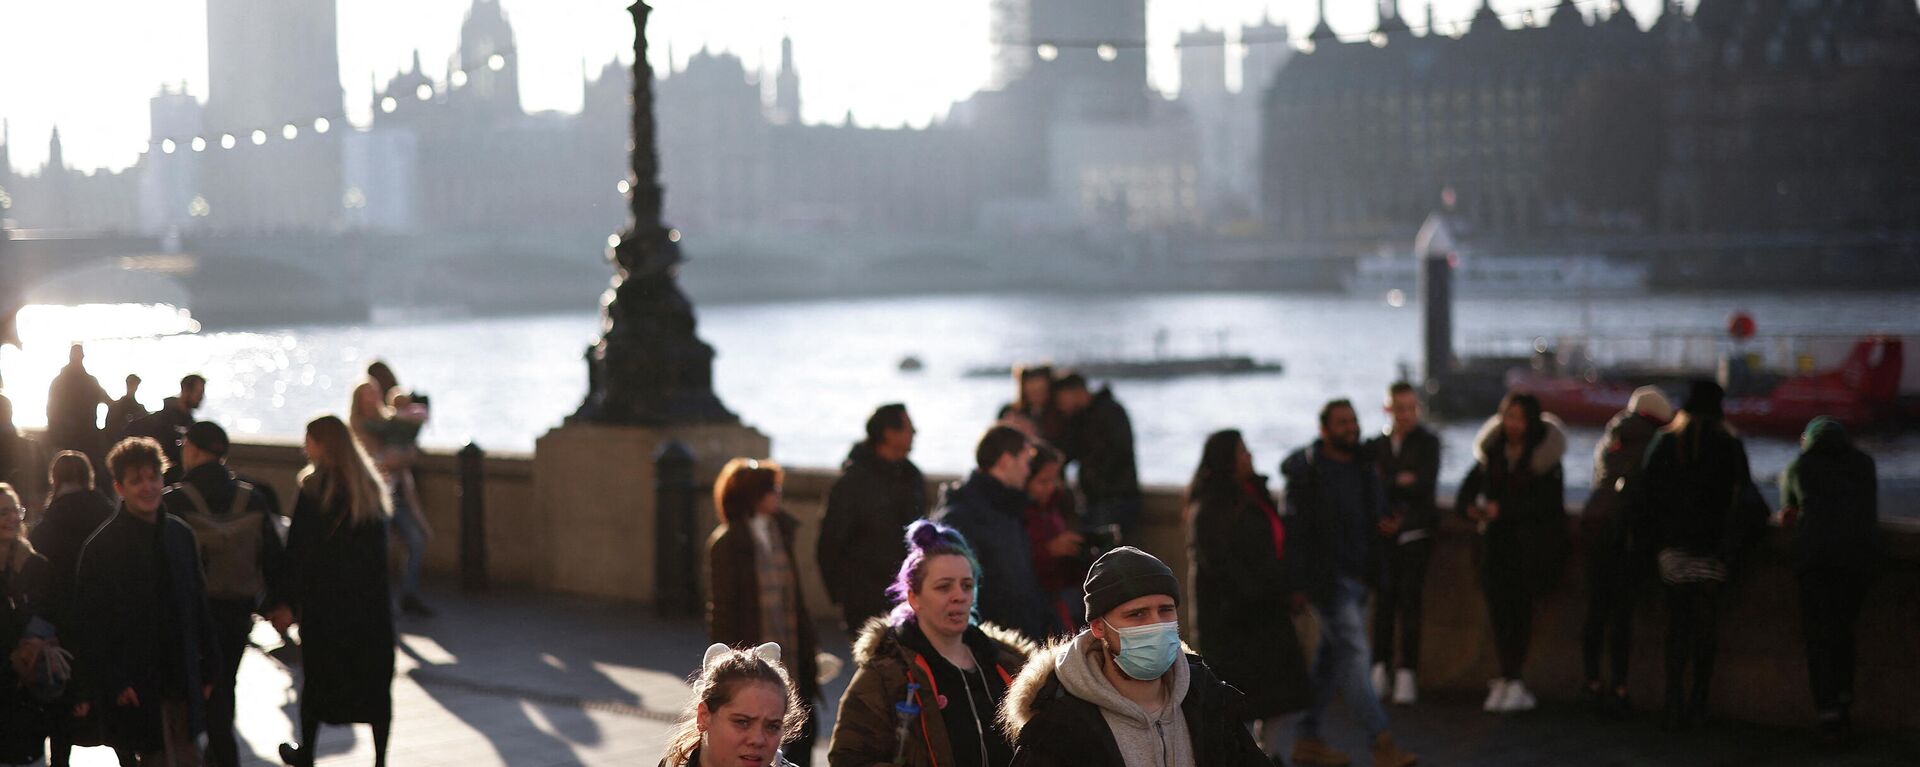 People walk along the South Bank, as the Houses of Parliament are seen at a distance, in London, Britain, January 16, 2022 - Sputnik International, 1920, 19.01.2022